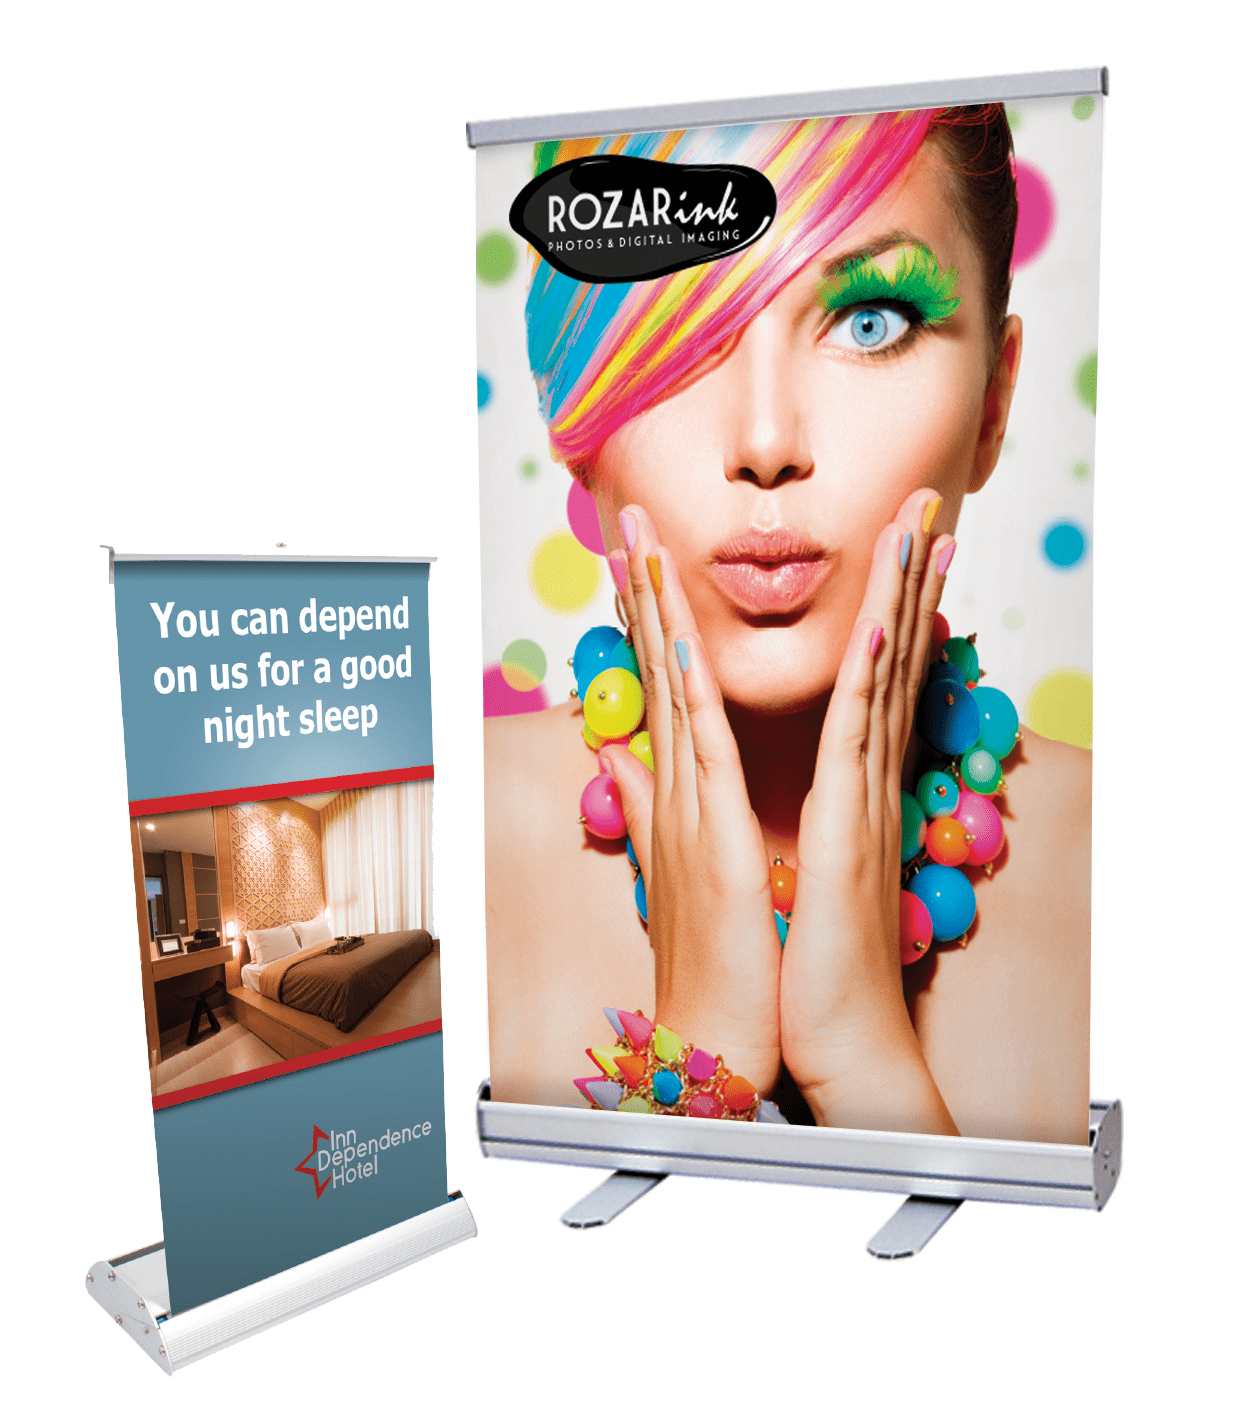 Table Top Retractable Banner